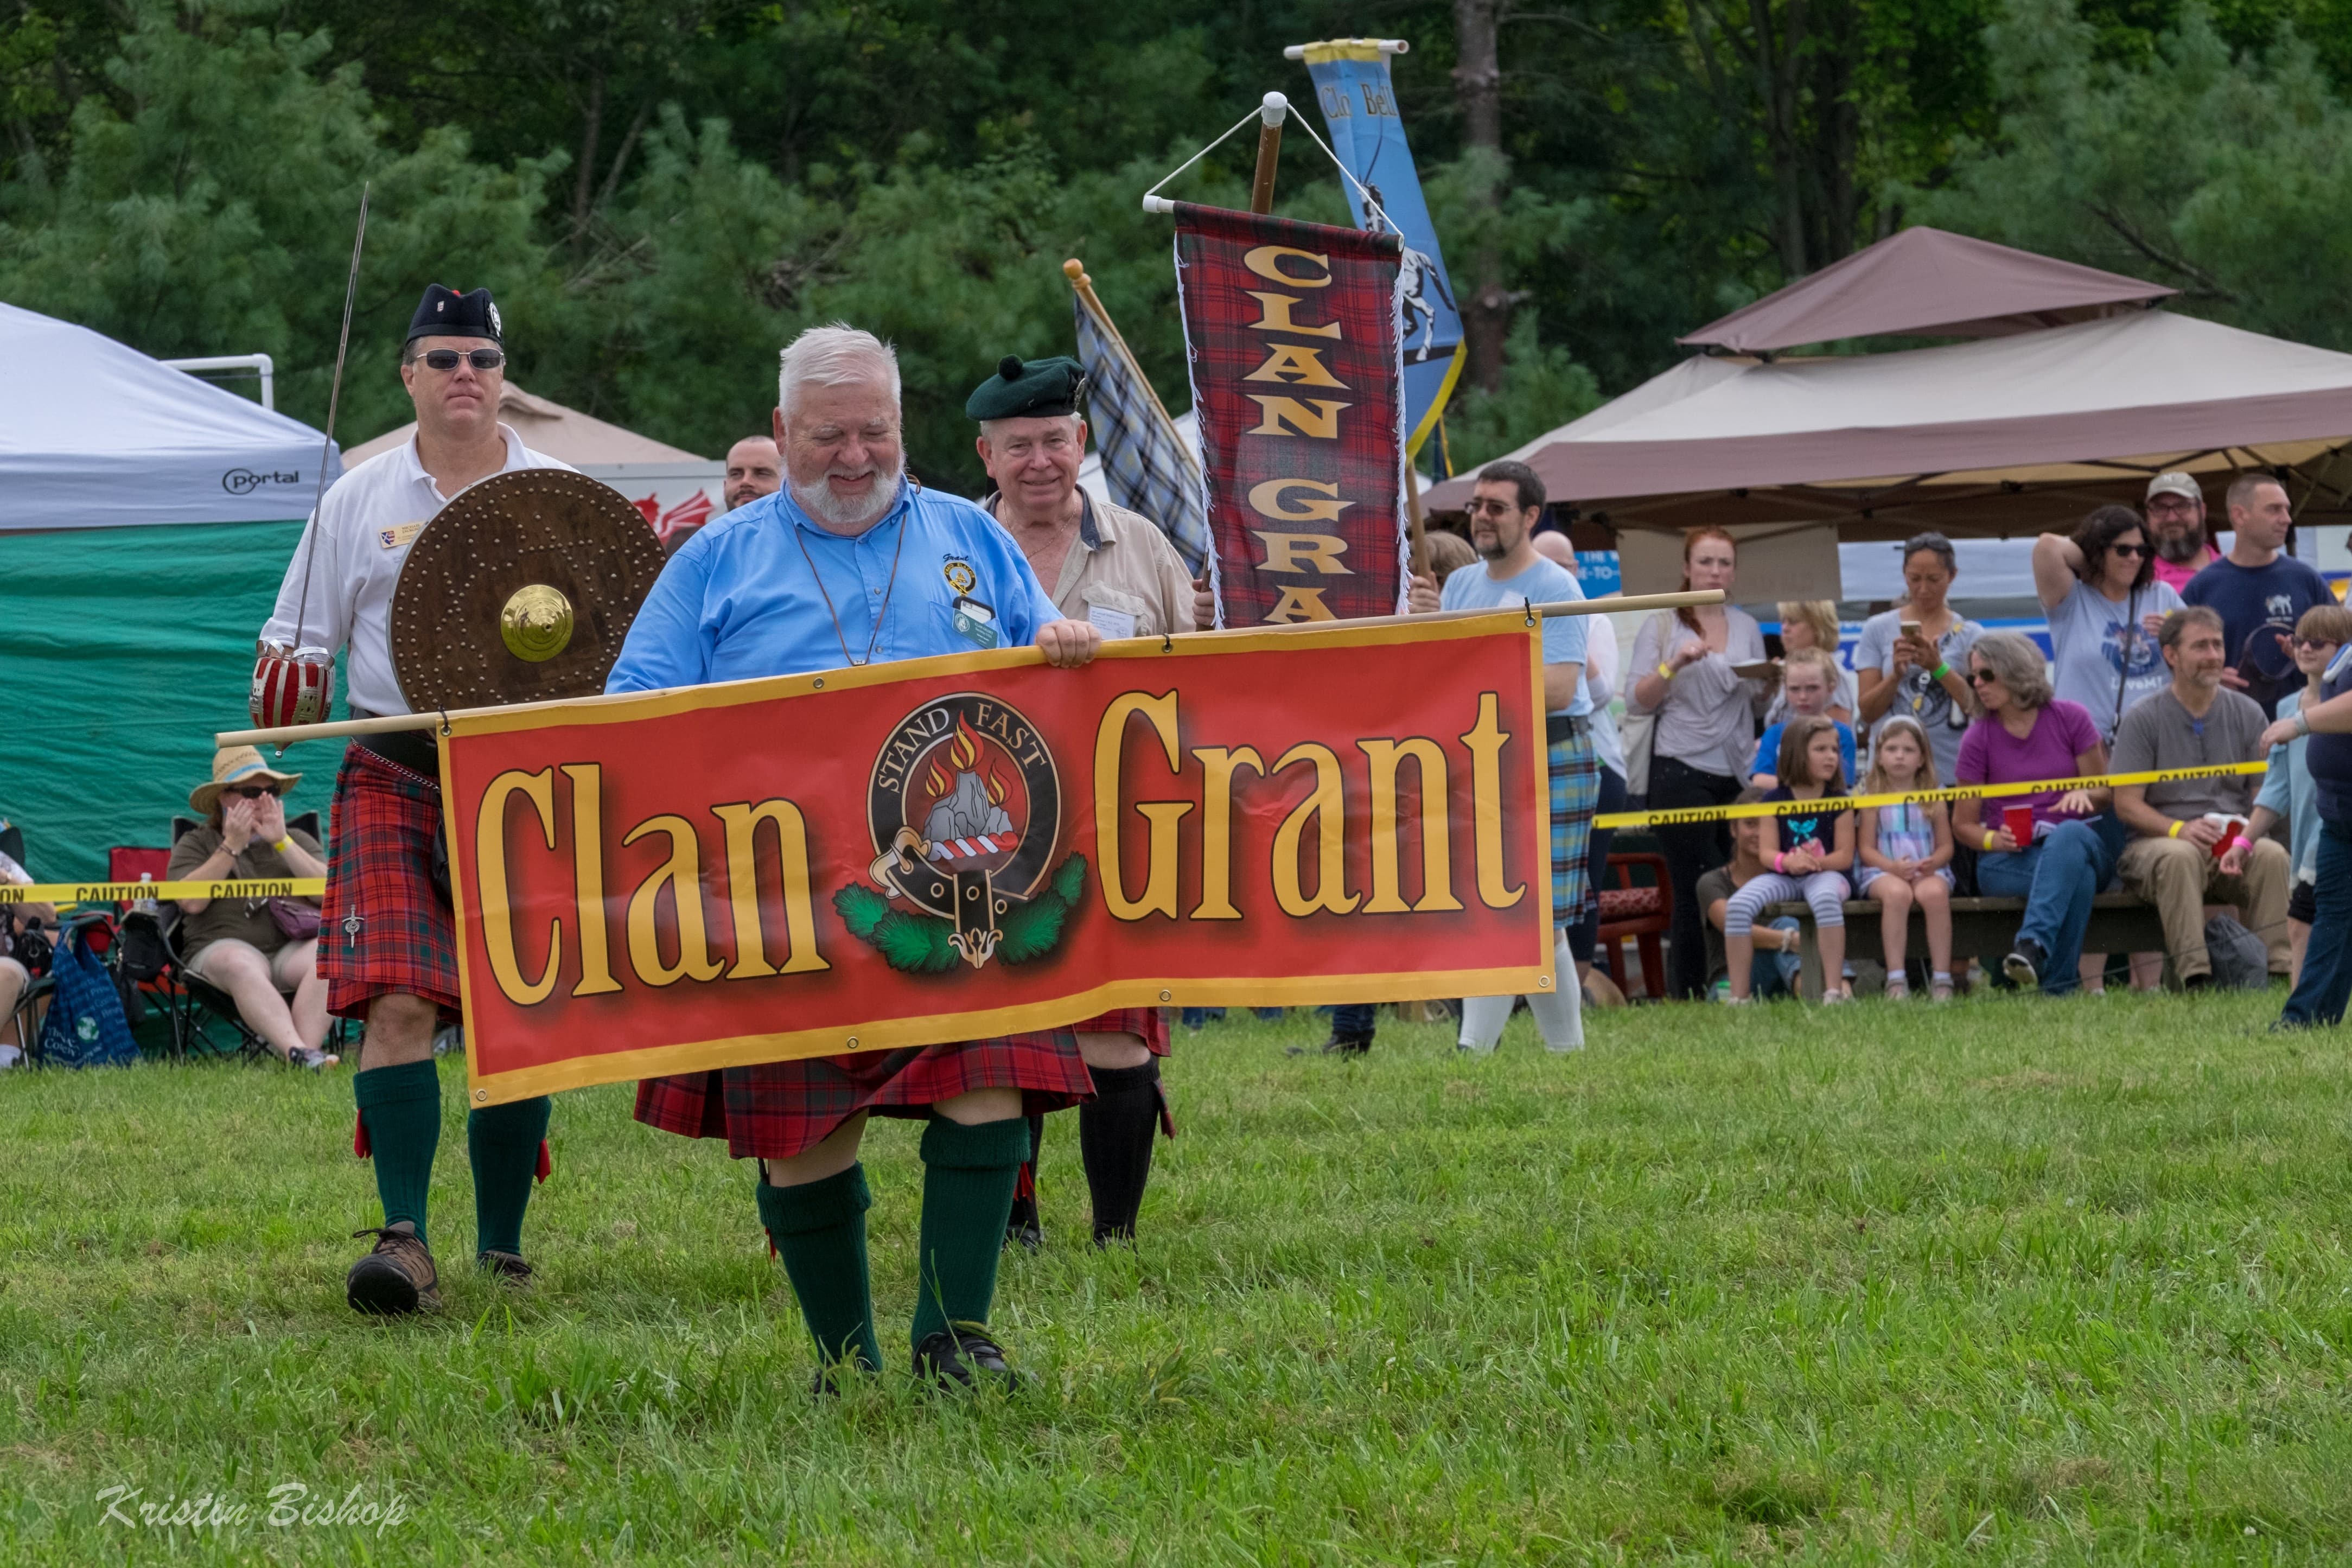 Clan Grant in the parade